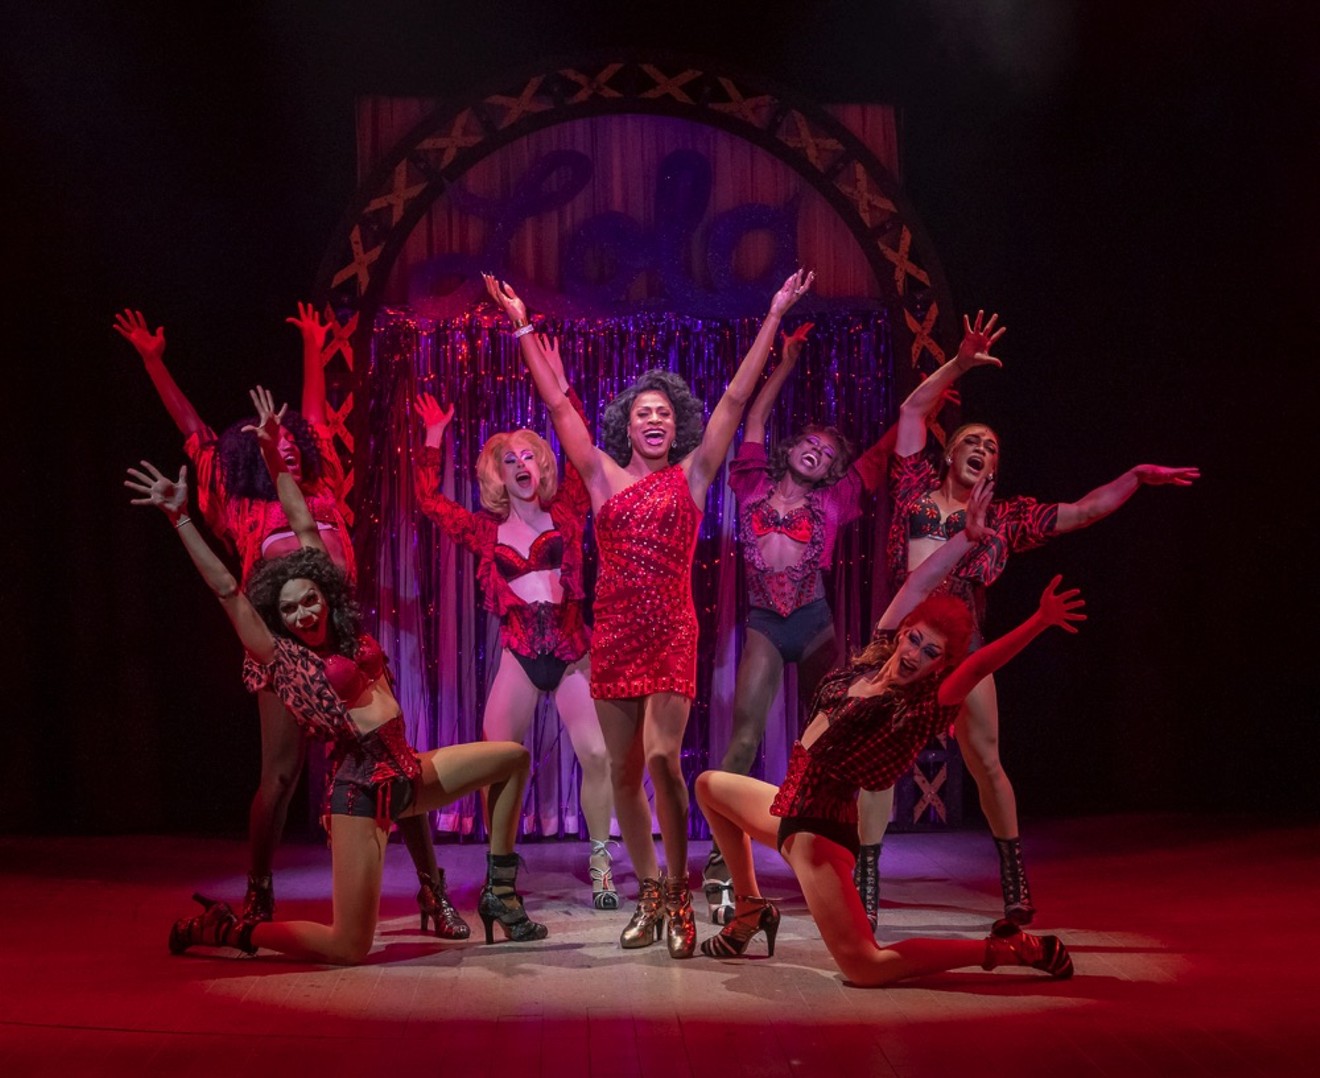 Lee Walter gives a mesmerizing performance as Lola in the Uptown Players production of Kinky Boots, by Harvey Fierstein and Cyndi Lauper.